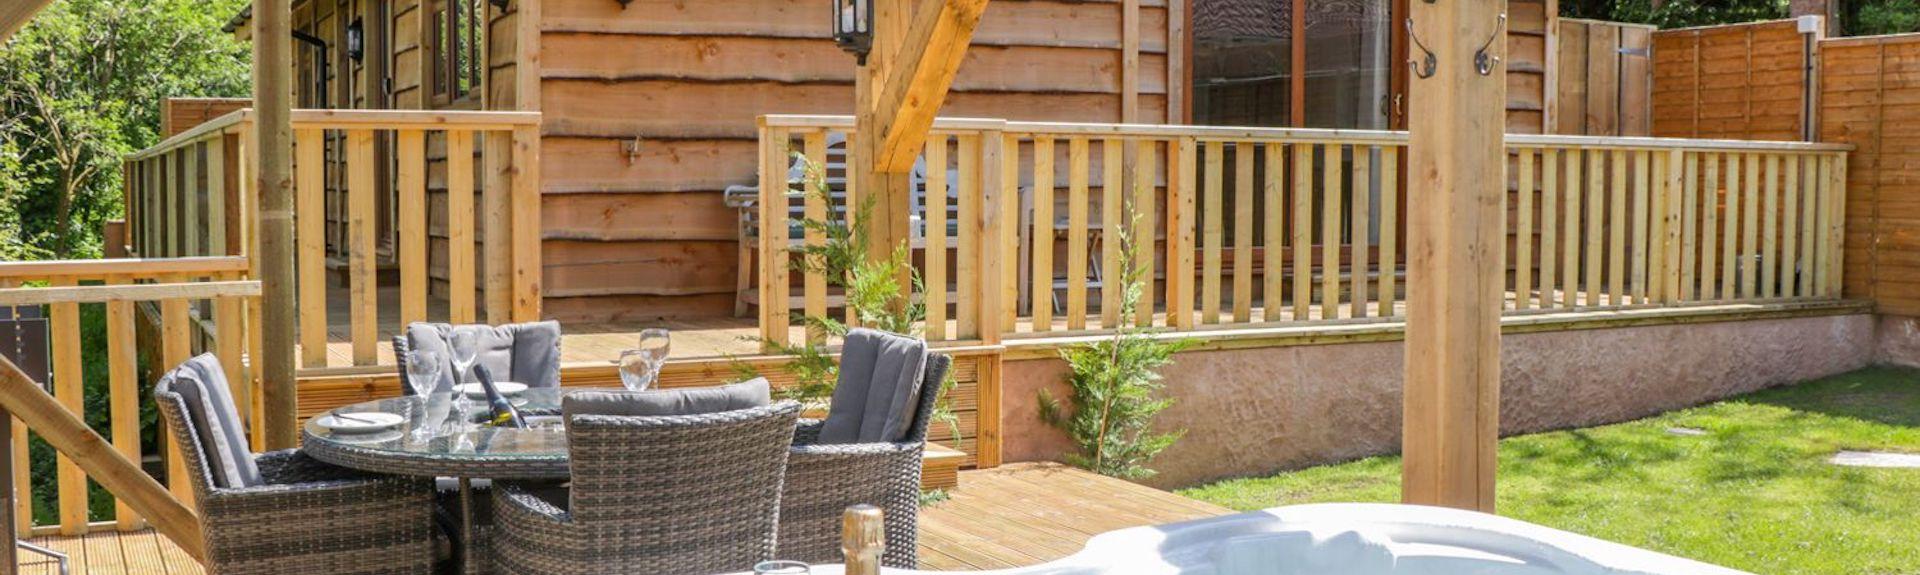 A wooden holiday lodge in Washford overlooks a patio with a hot tub. on a terrace/